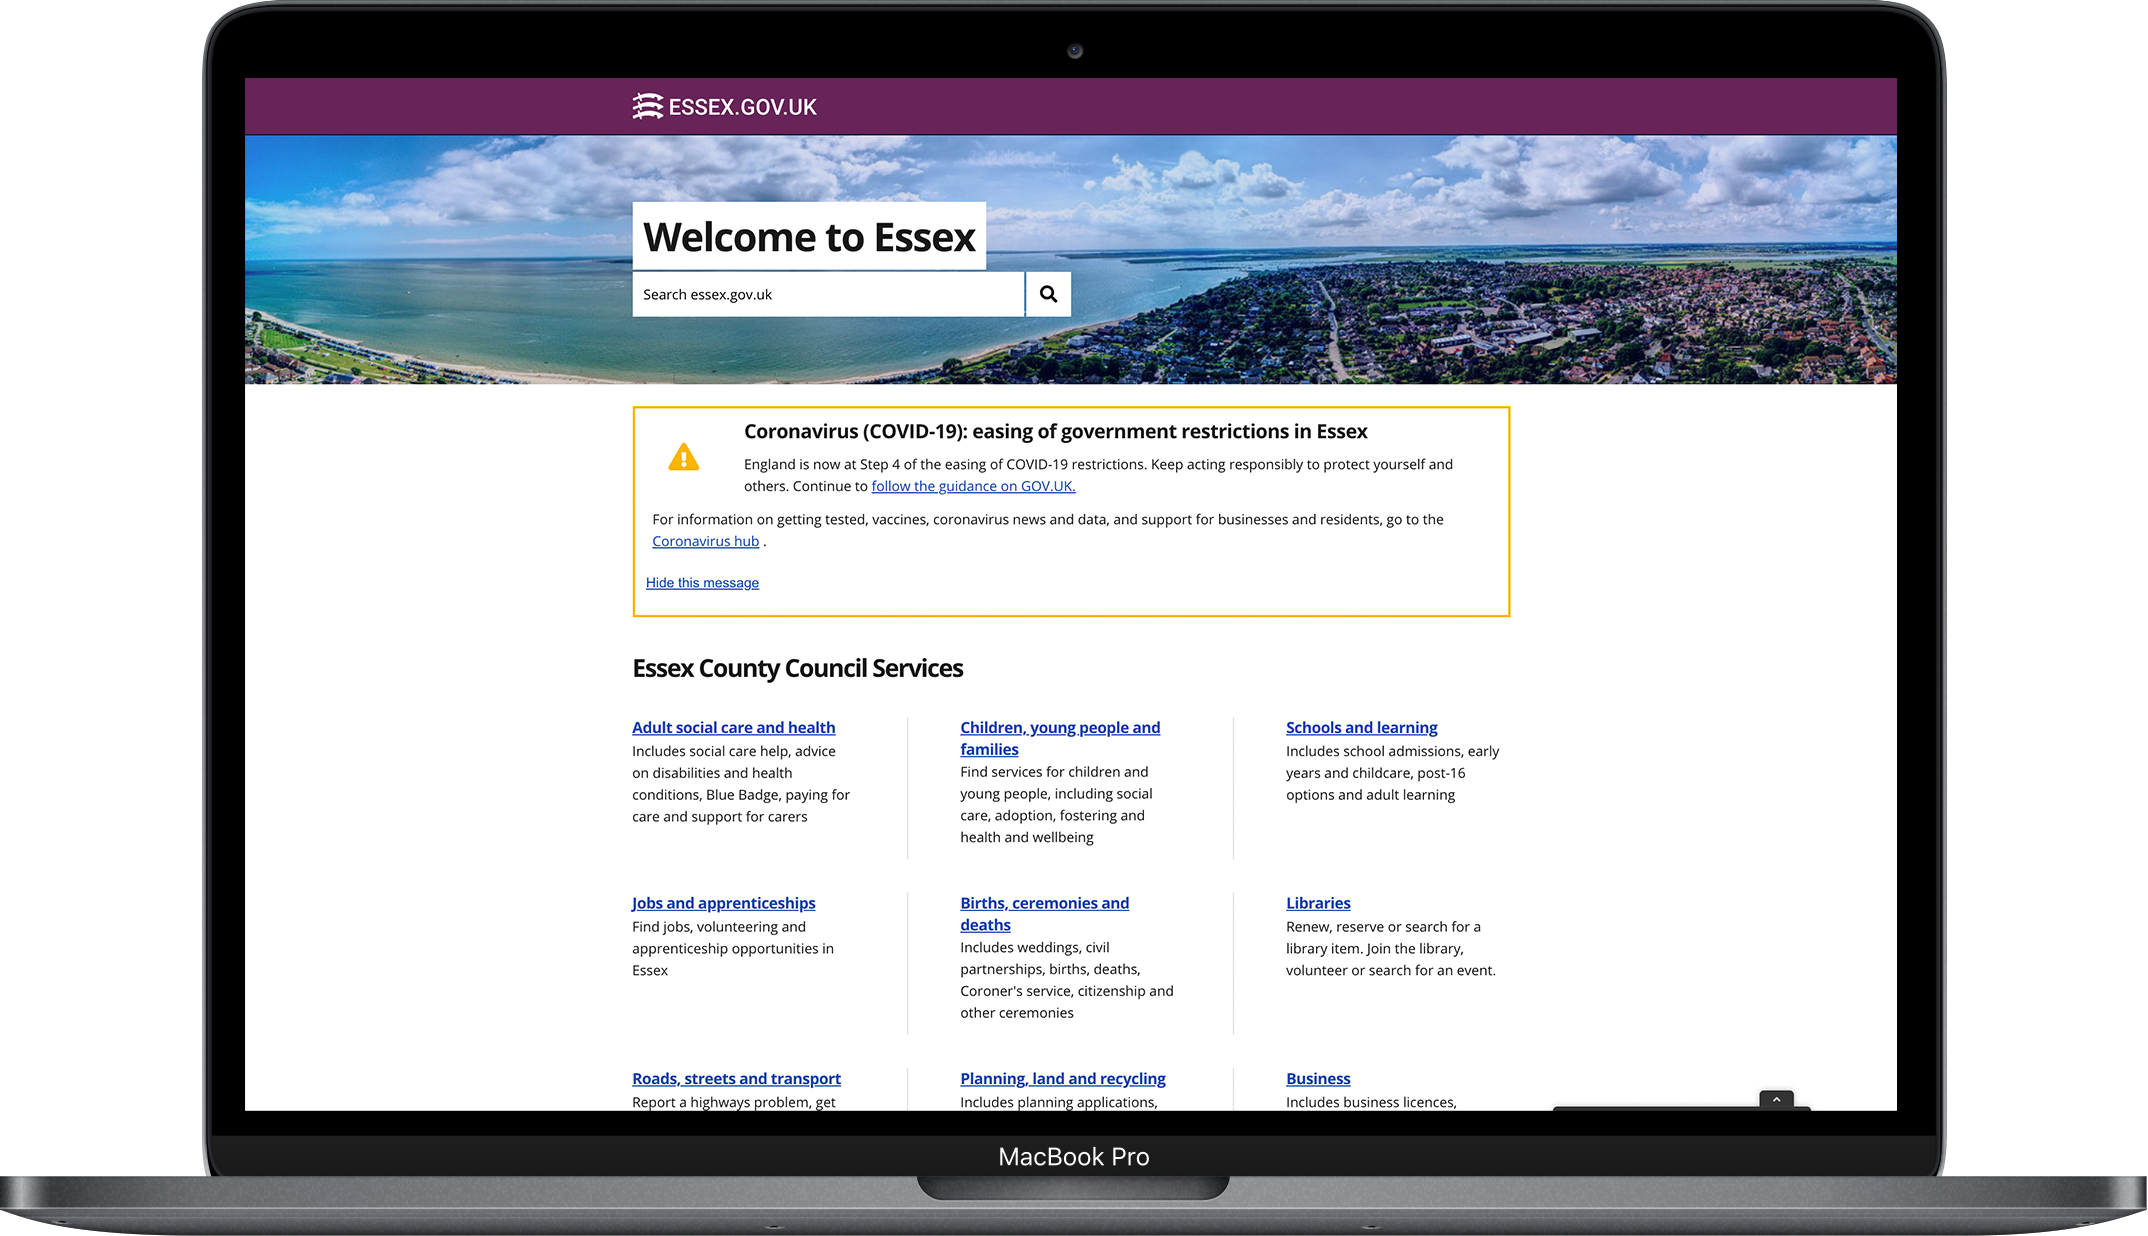 Photo showing the Essex County Council's Welcome to Essex webpage on a laptop